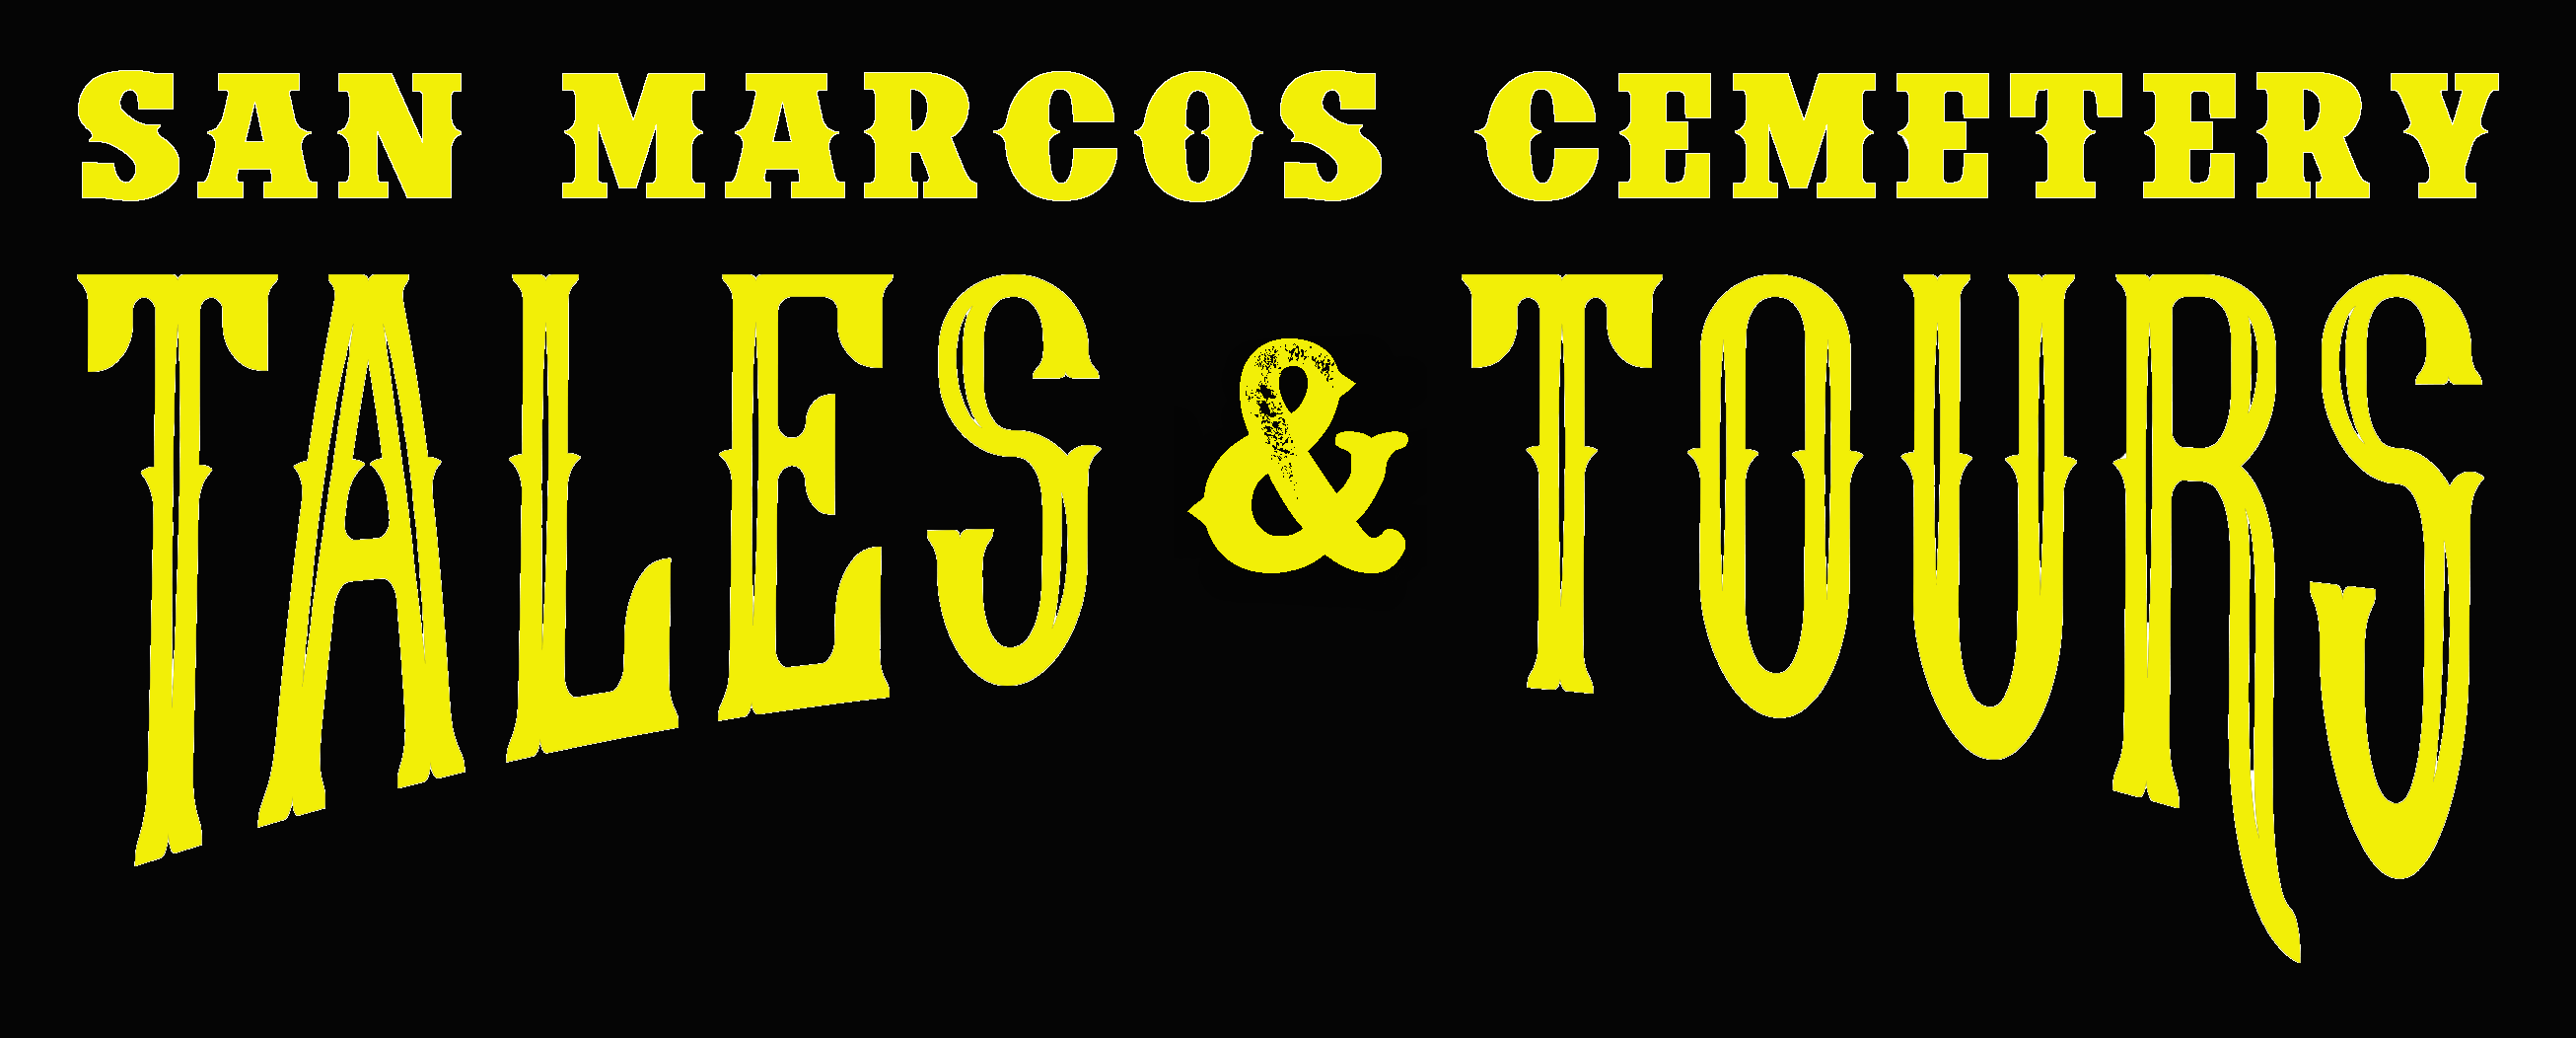 Friends of the San Marcos Cemetery | Tales & Tours